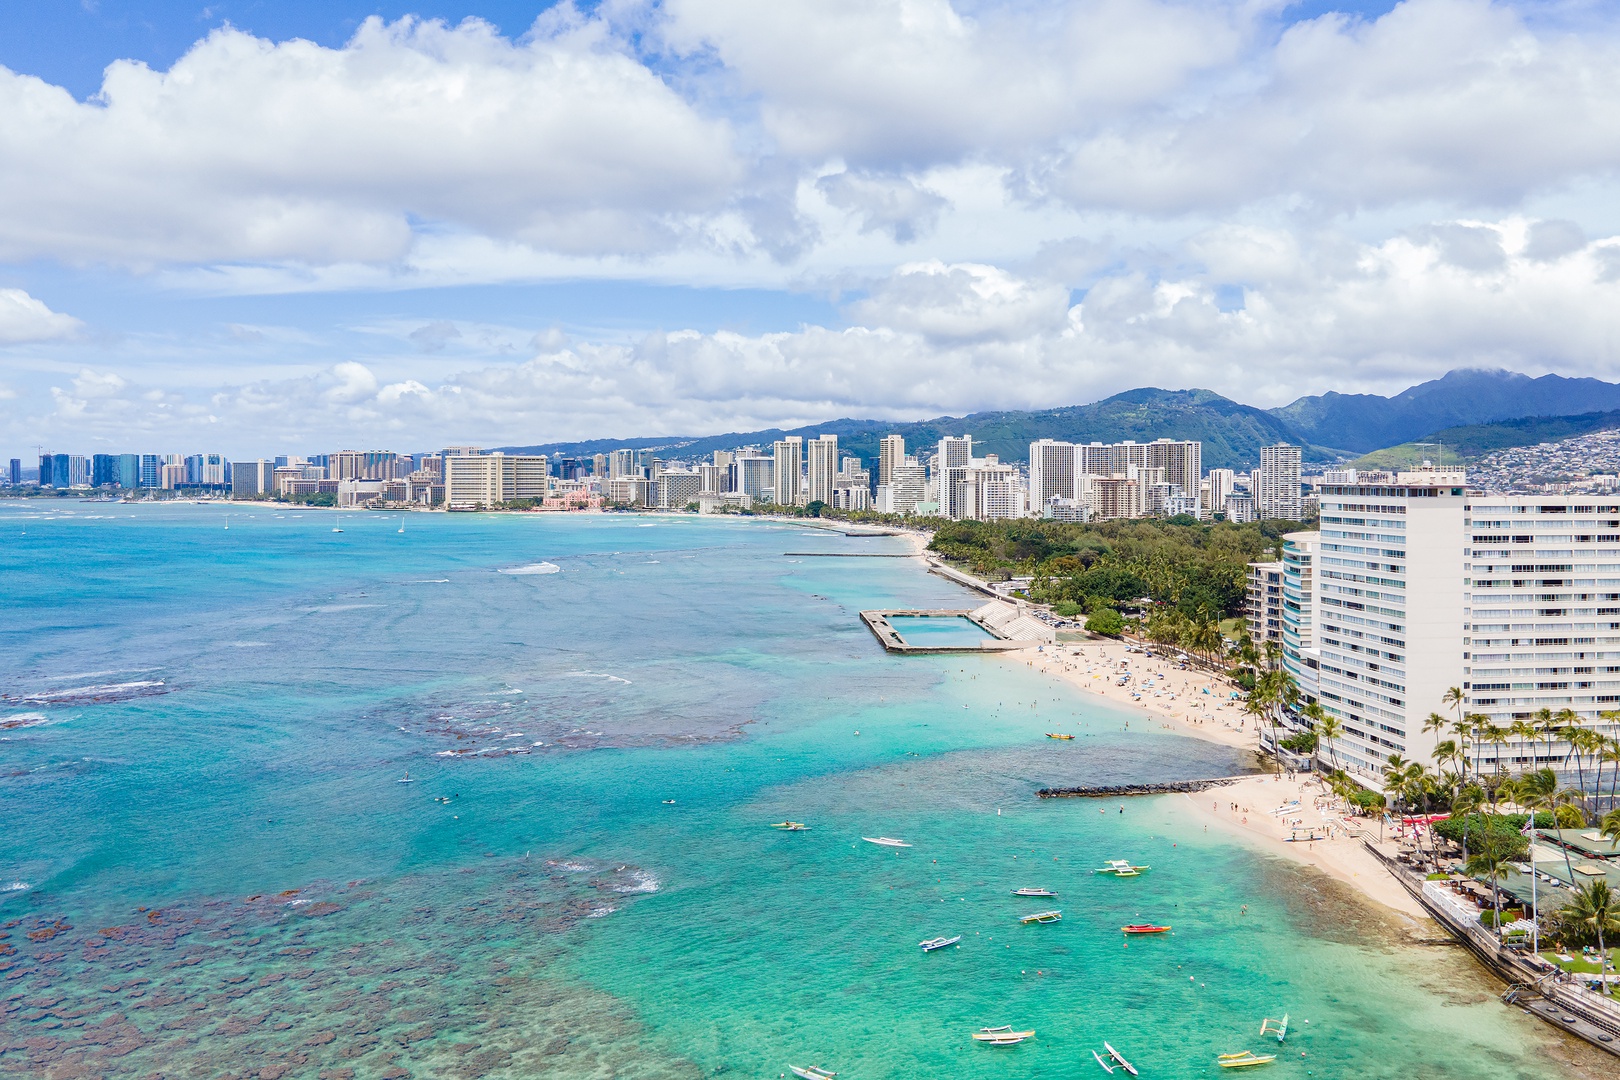 Honolulu Vacation Rentals, Diamond Head Sunset - Whether you're relaxing on the balcony watching the sunset, taking a dip in the ocean, or exploring the nearby attractions, Diamond Head Sunset is the perfect home base for your Diamond Head vacation